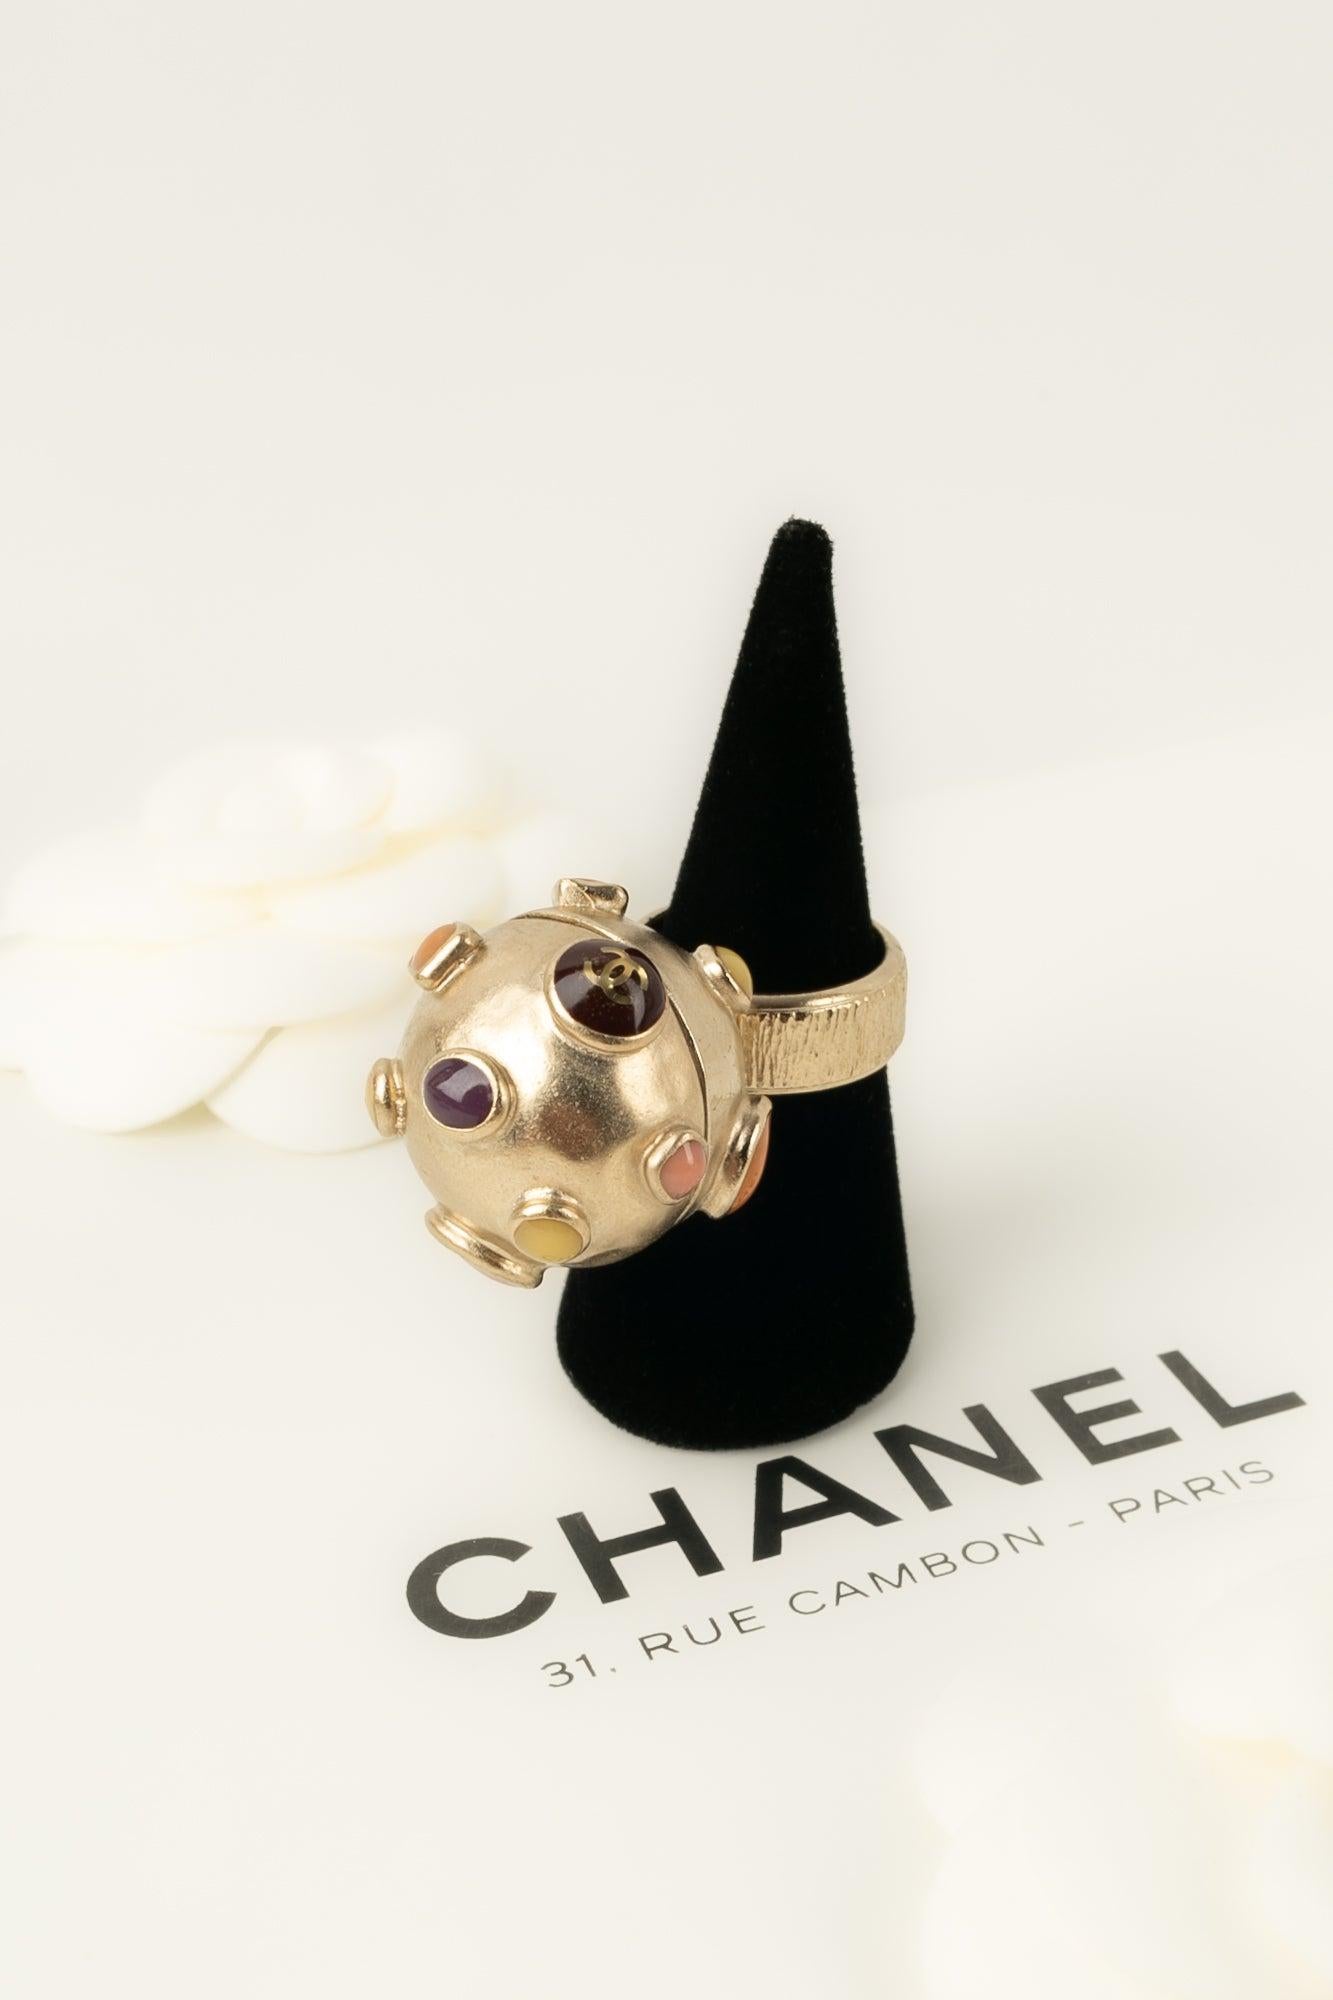 Chanel -  (Made in France) Ring in champagne metal and resin. Fall/Winter 2007 Collection.

Additional information:
Condition: Very good condition
Dimensions: Size 52
Period: 21st Century

Seller Reference: BGB3